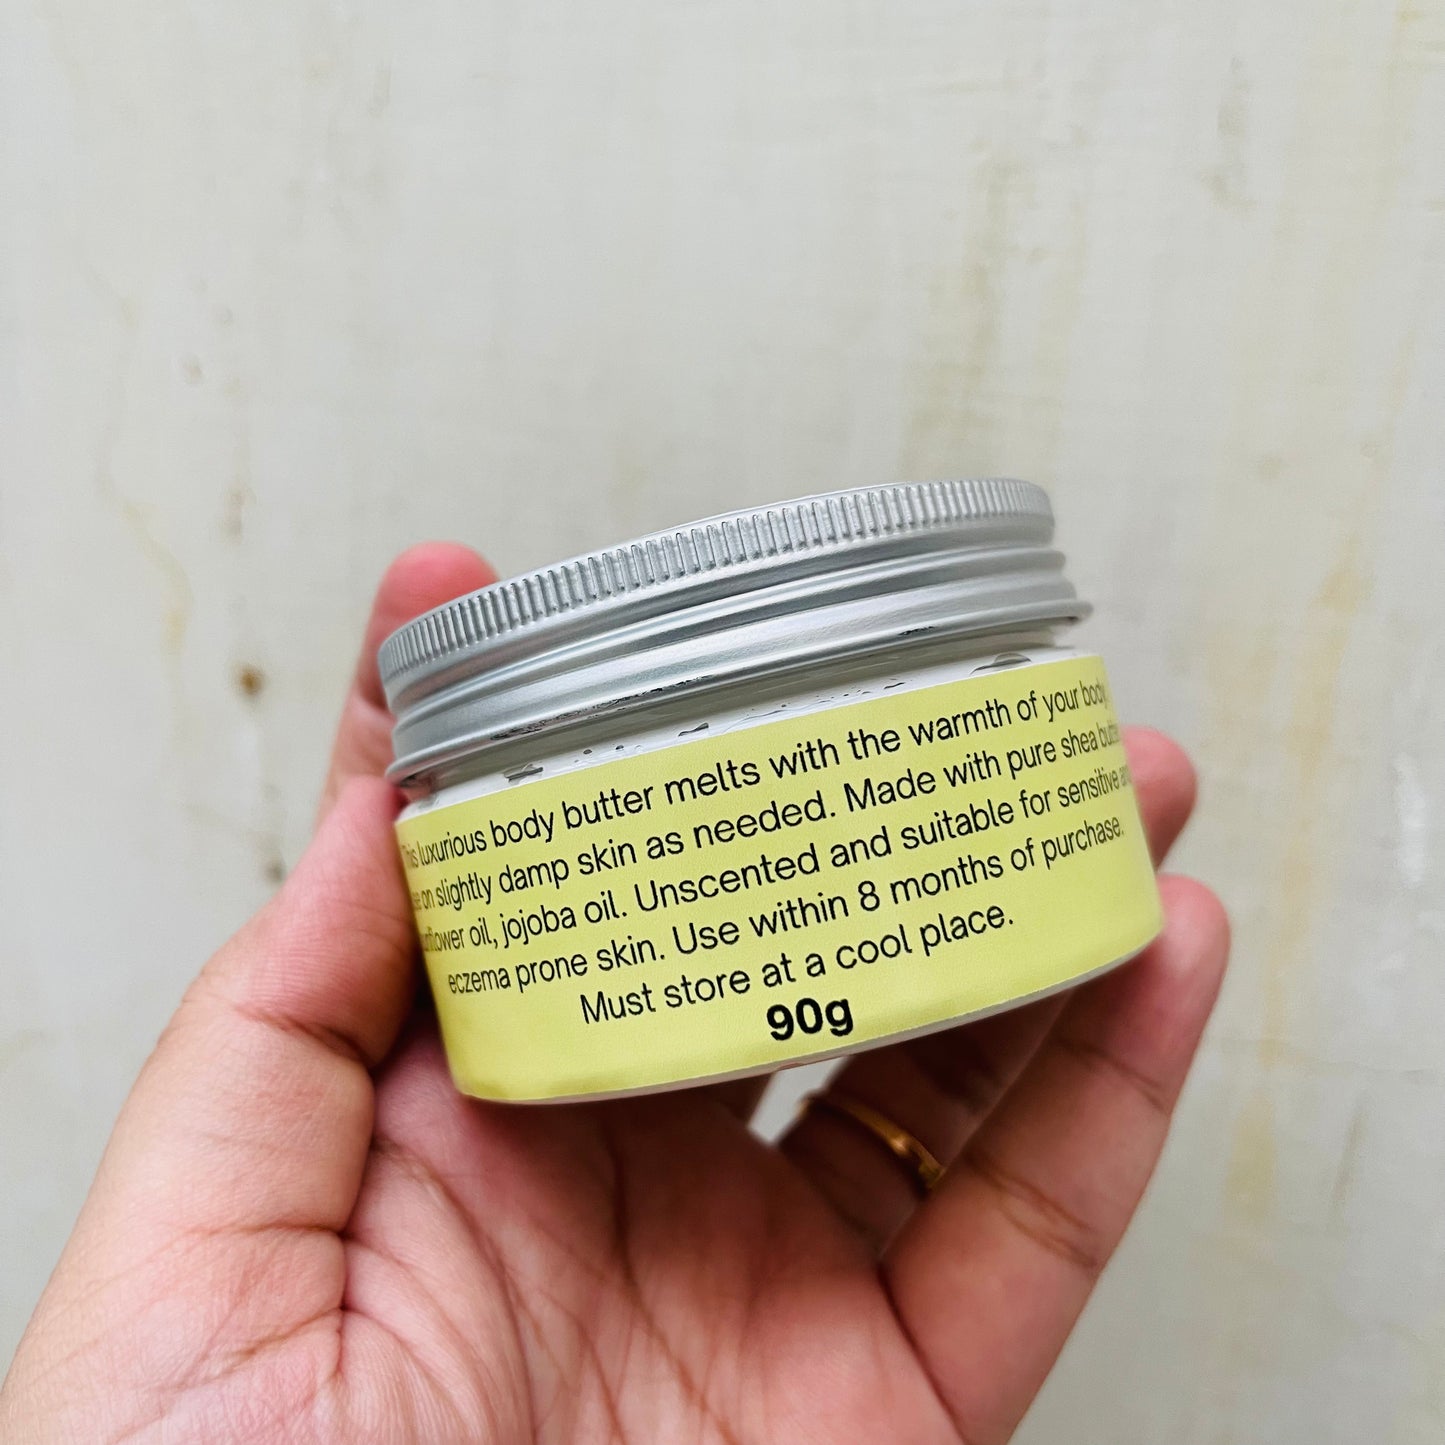 Relief - Whipped Body Butter